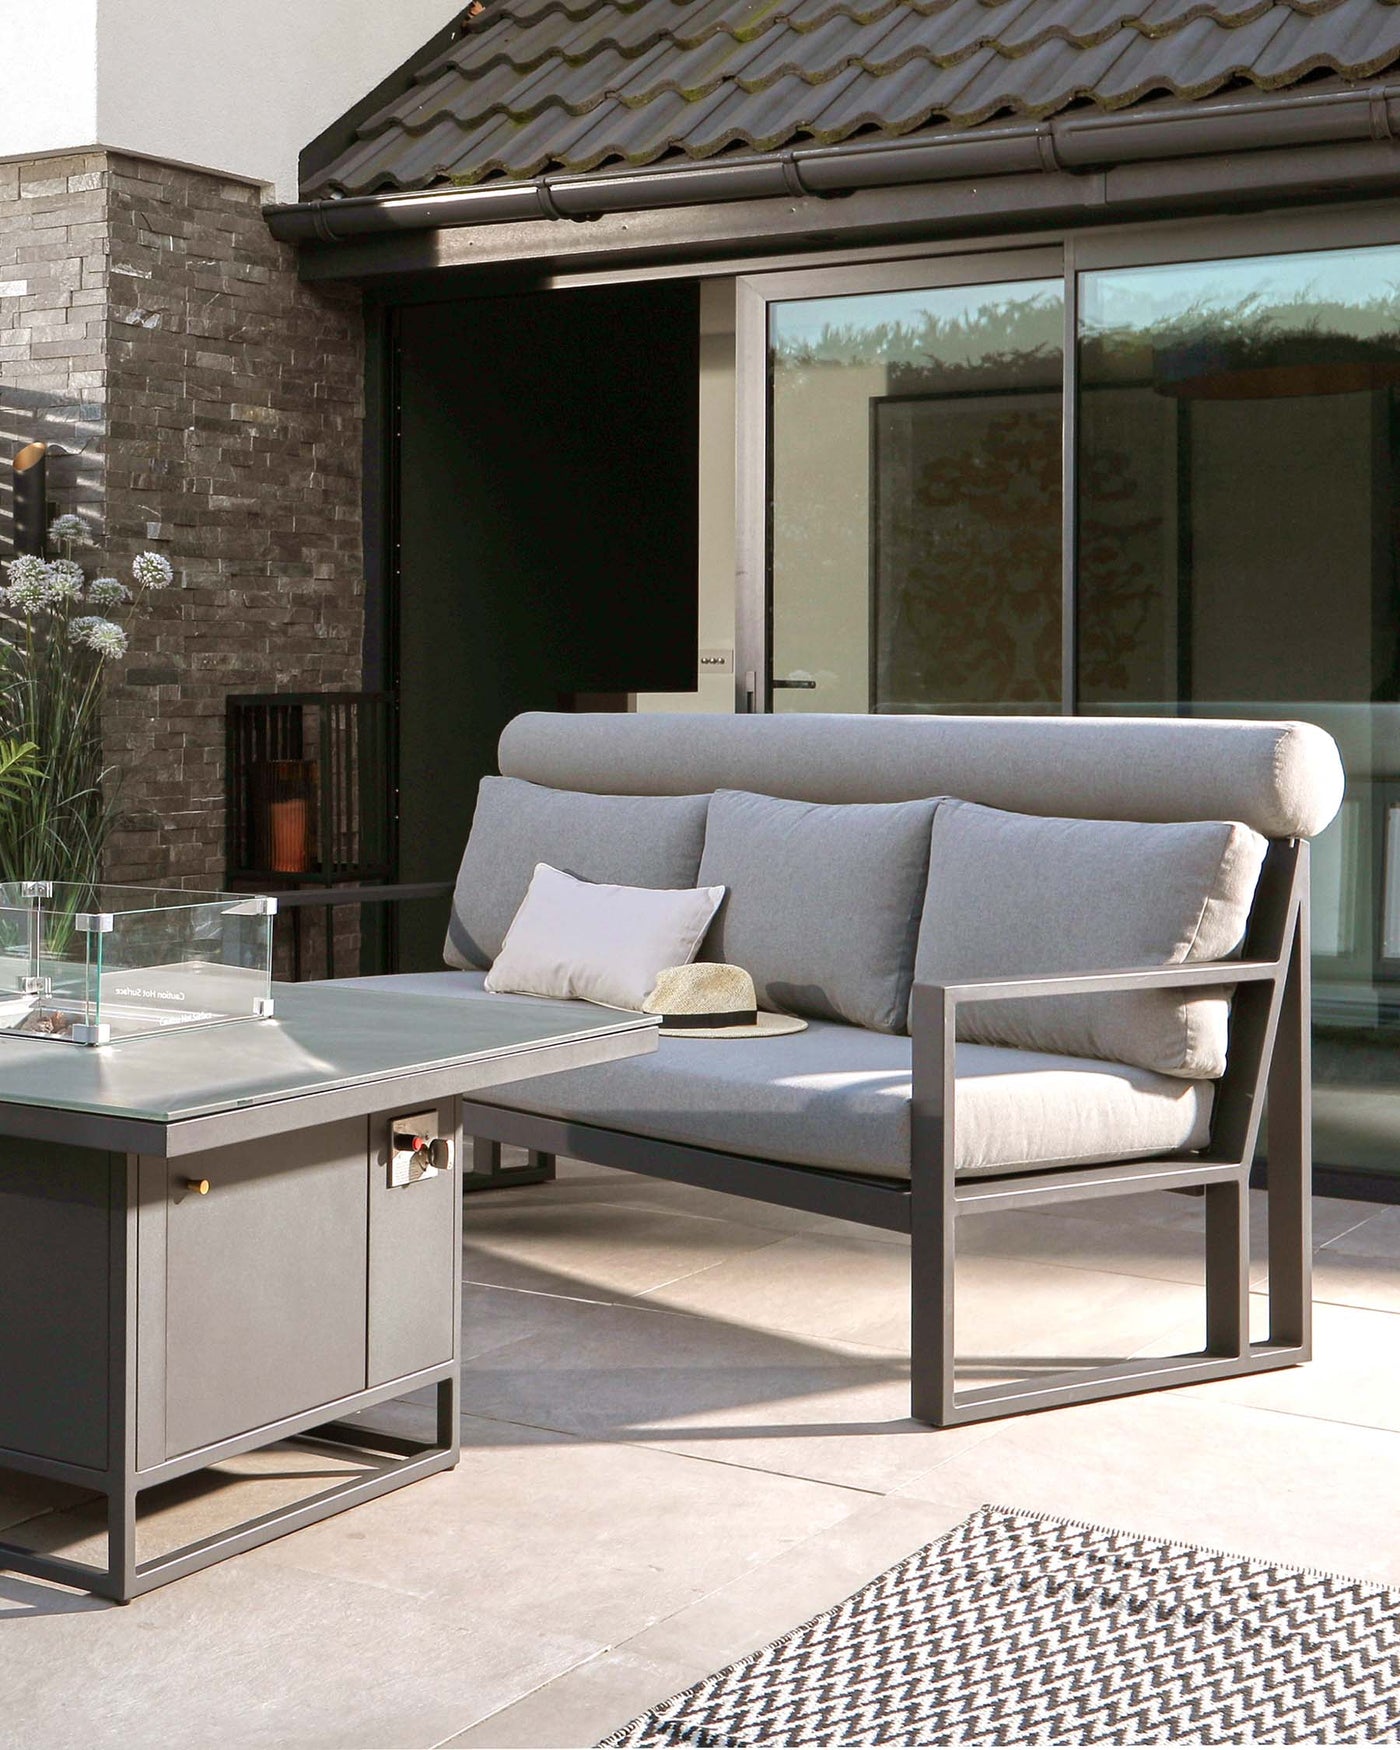 Contemporary outdoor furniture set featuring a sleek grey two-seater sofa with plush cushions and a matching grey rectangular coffee table with a glass top and built-in metal shelf. A simple white pillow and a wicker hat rest on the sofa, adding a touch of comfort and style. The set suggests sophisticated design suitable for modern patio or garden spaces.